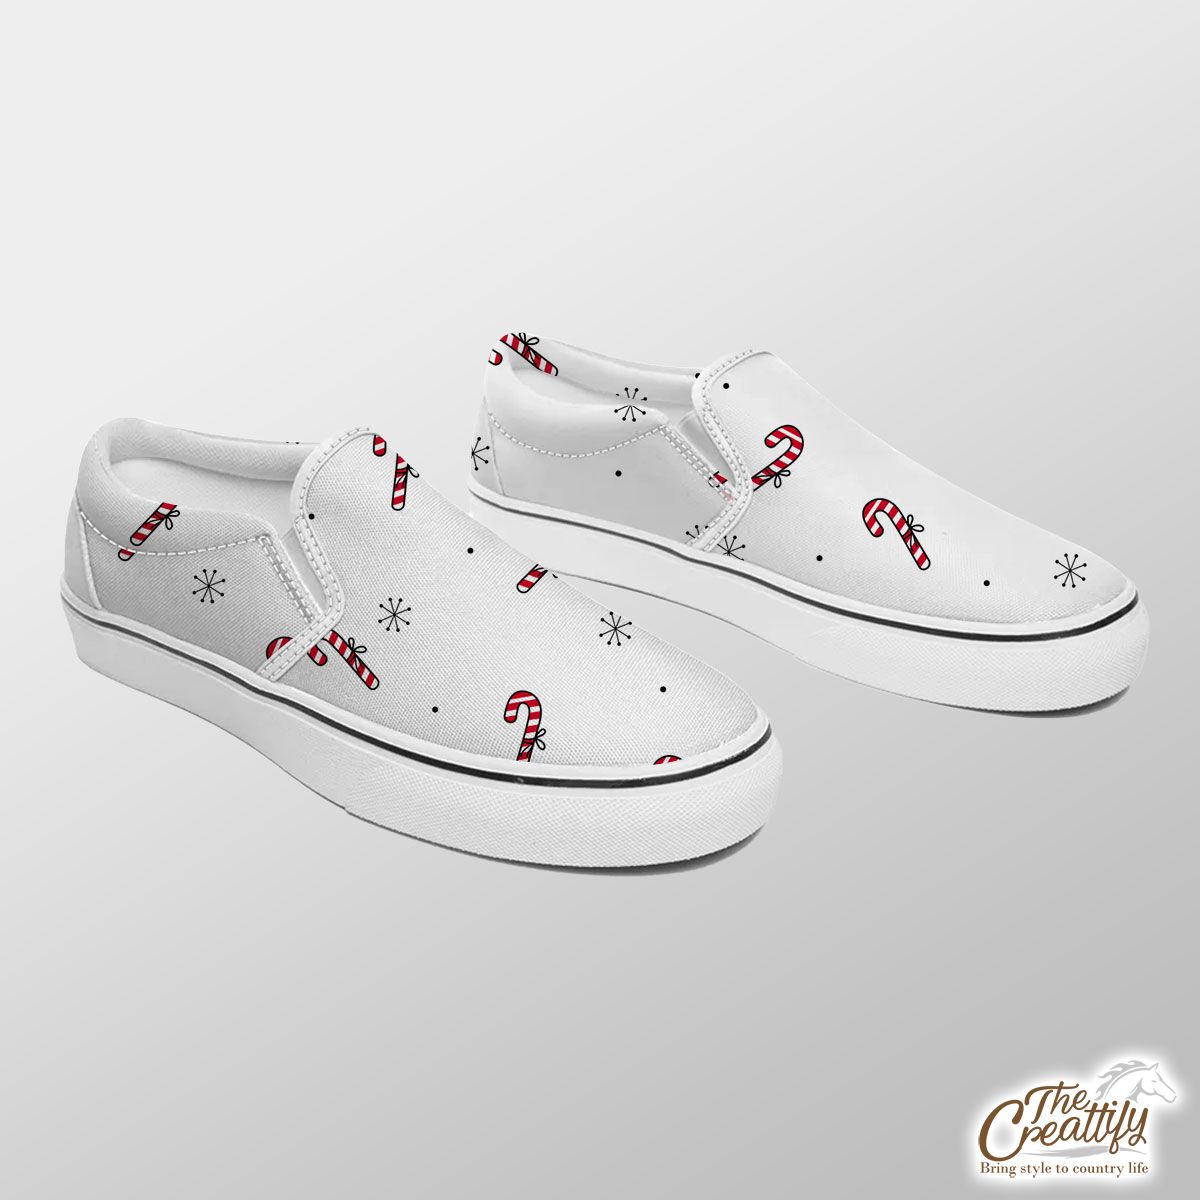 Hand Drawn Candy Canes, Snowflake Clipart Seamless White Pattern Slip On Sneakers